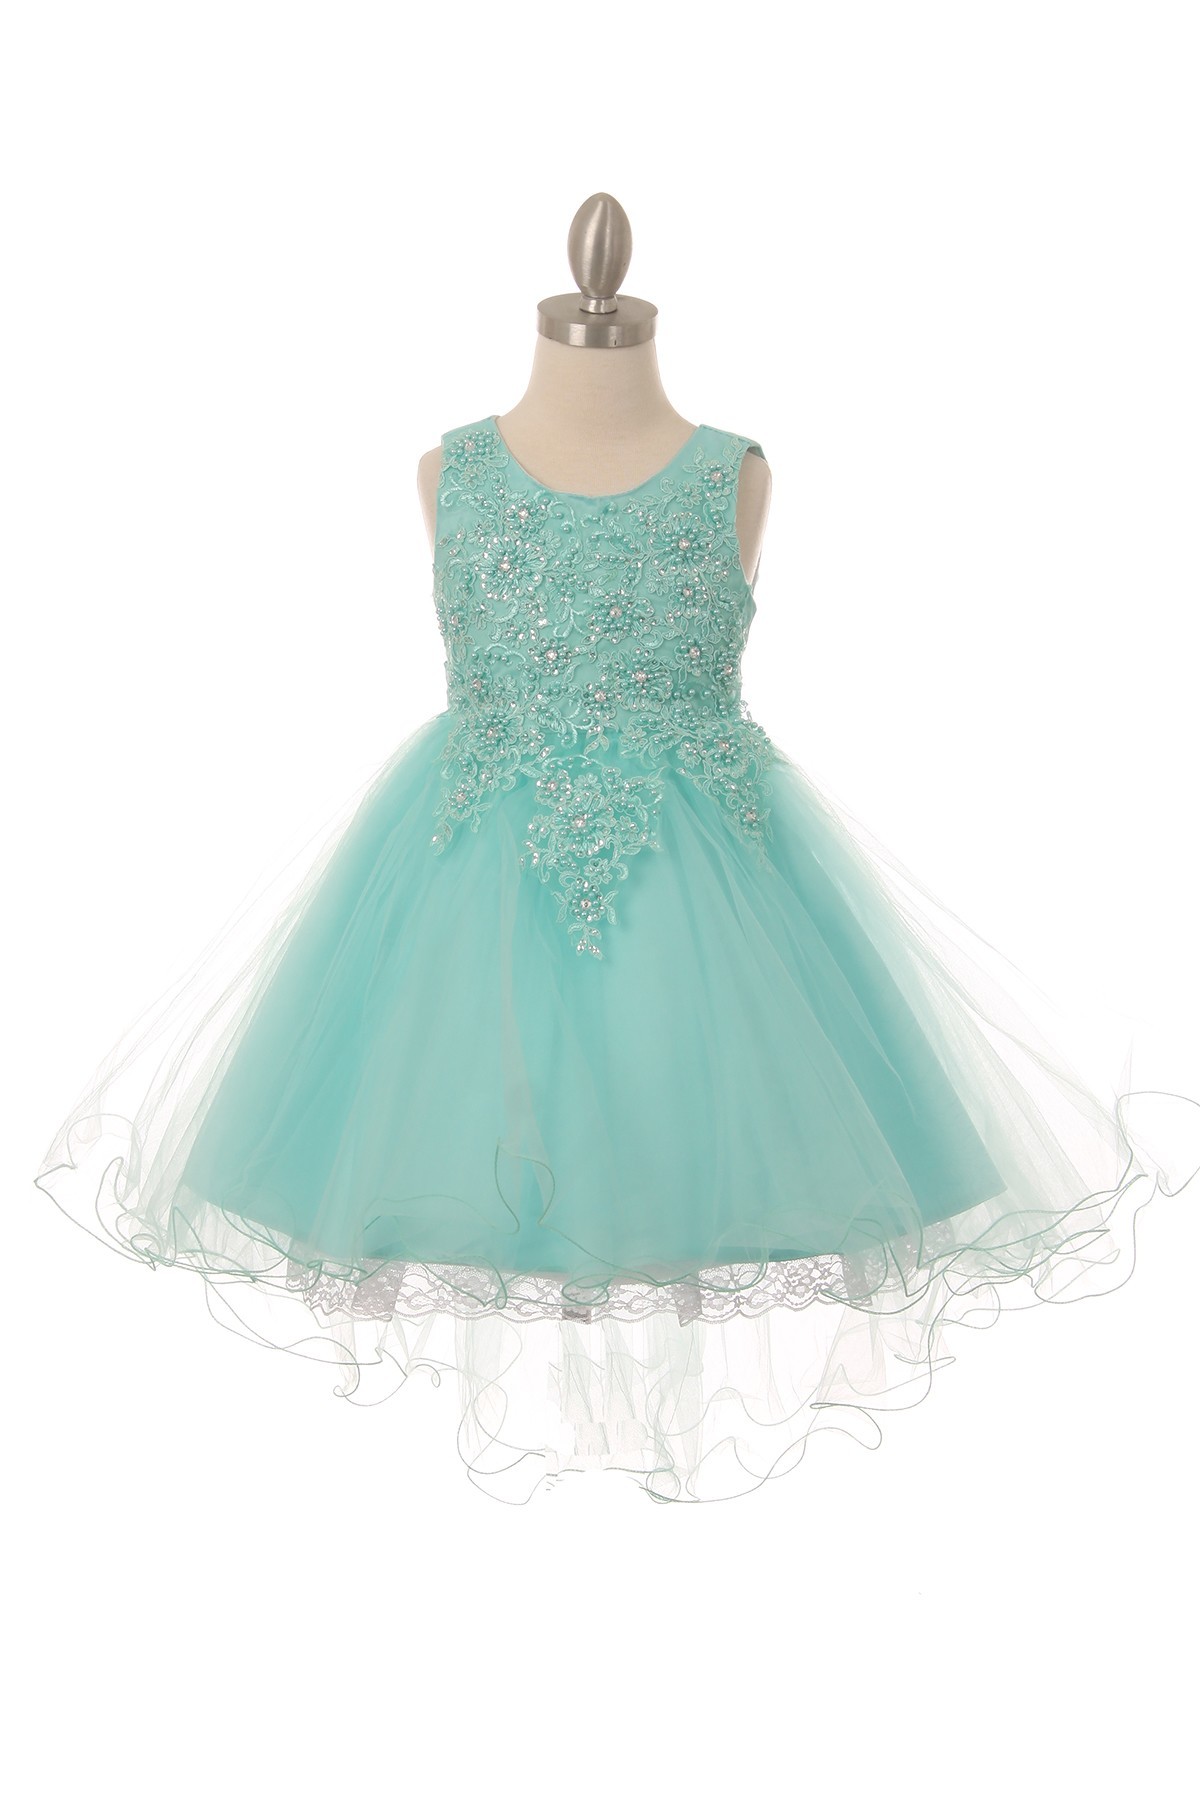 Sleeveless aqua tulle and lace dress, with pearls and sparkling rhinestones, and wired hem.